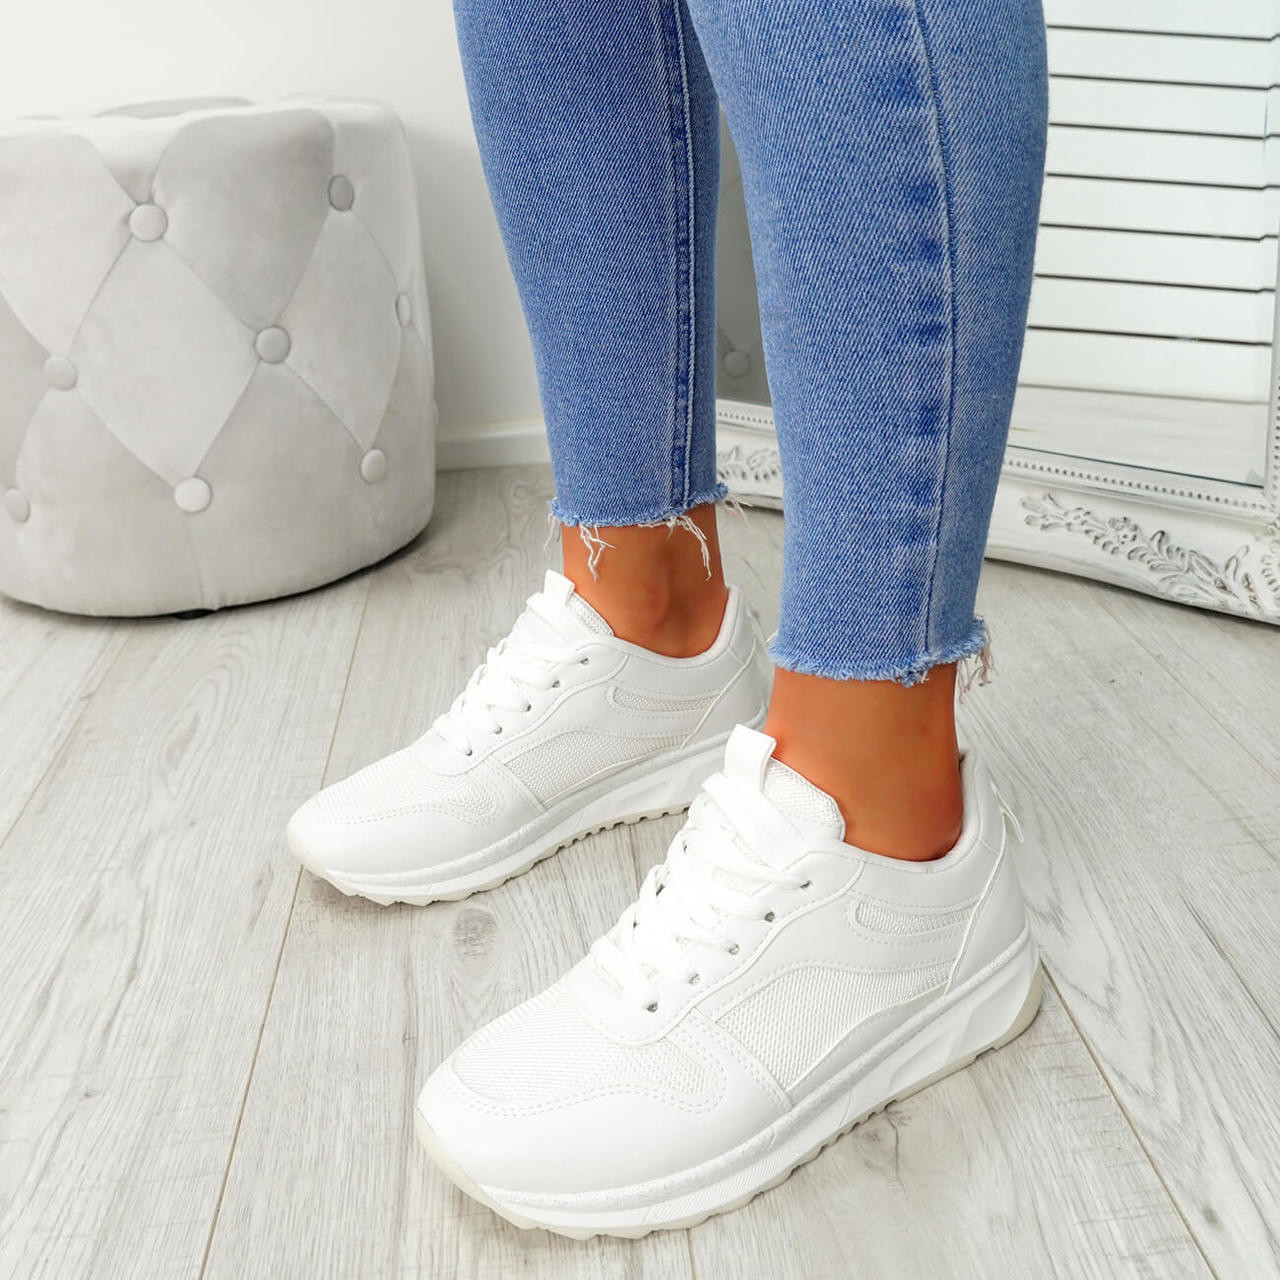 white trainers for summer